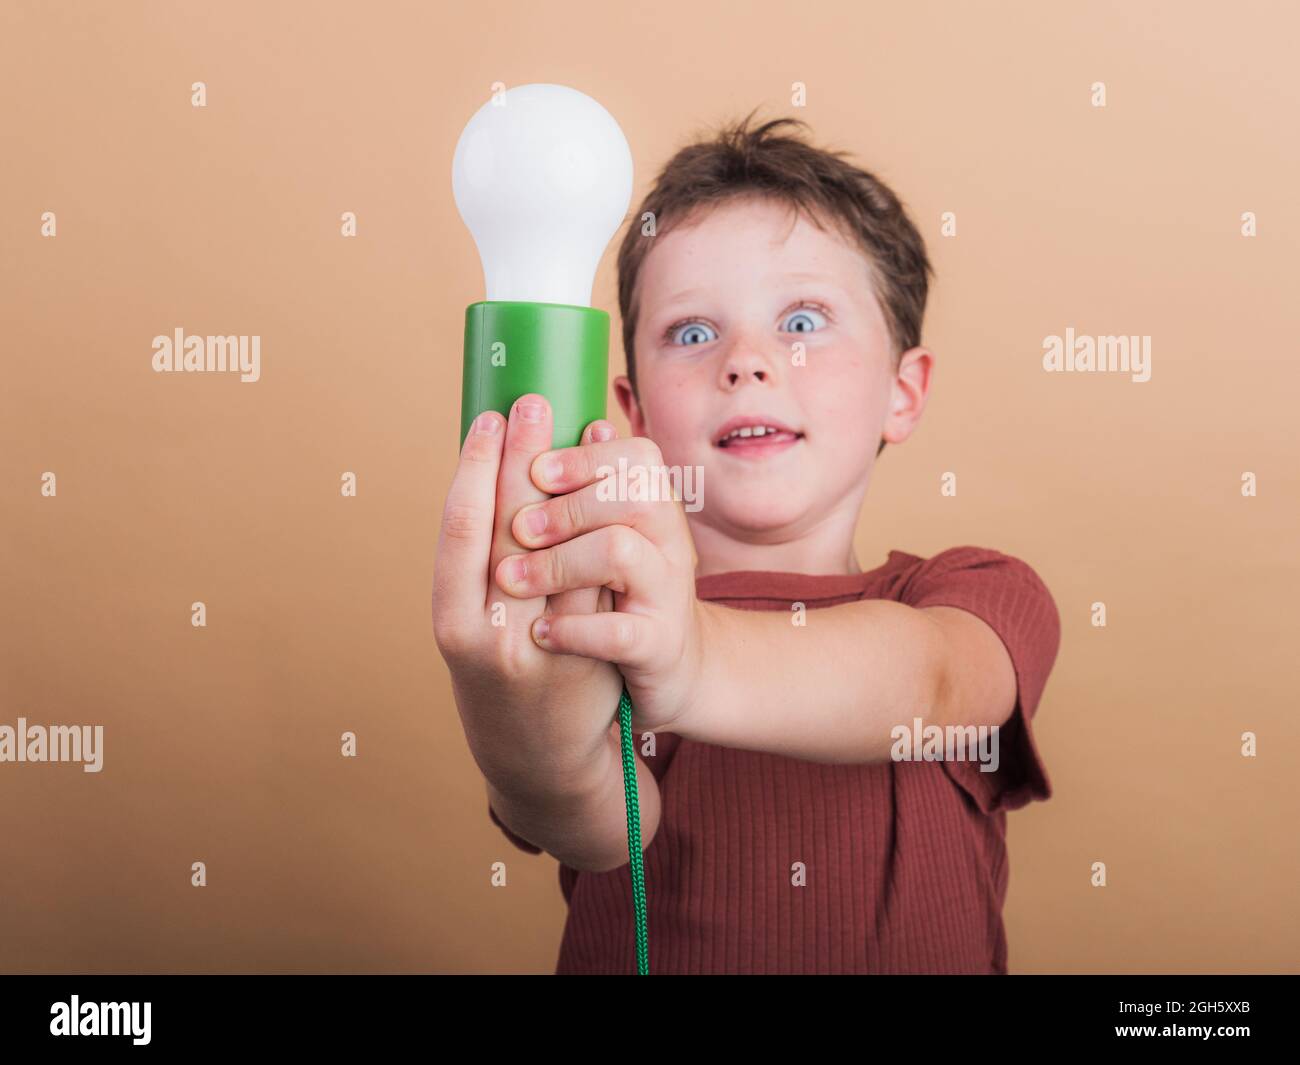 Surprised child in t shirt with plastic light bulb representing idea concept on beige background Stock Photo